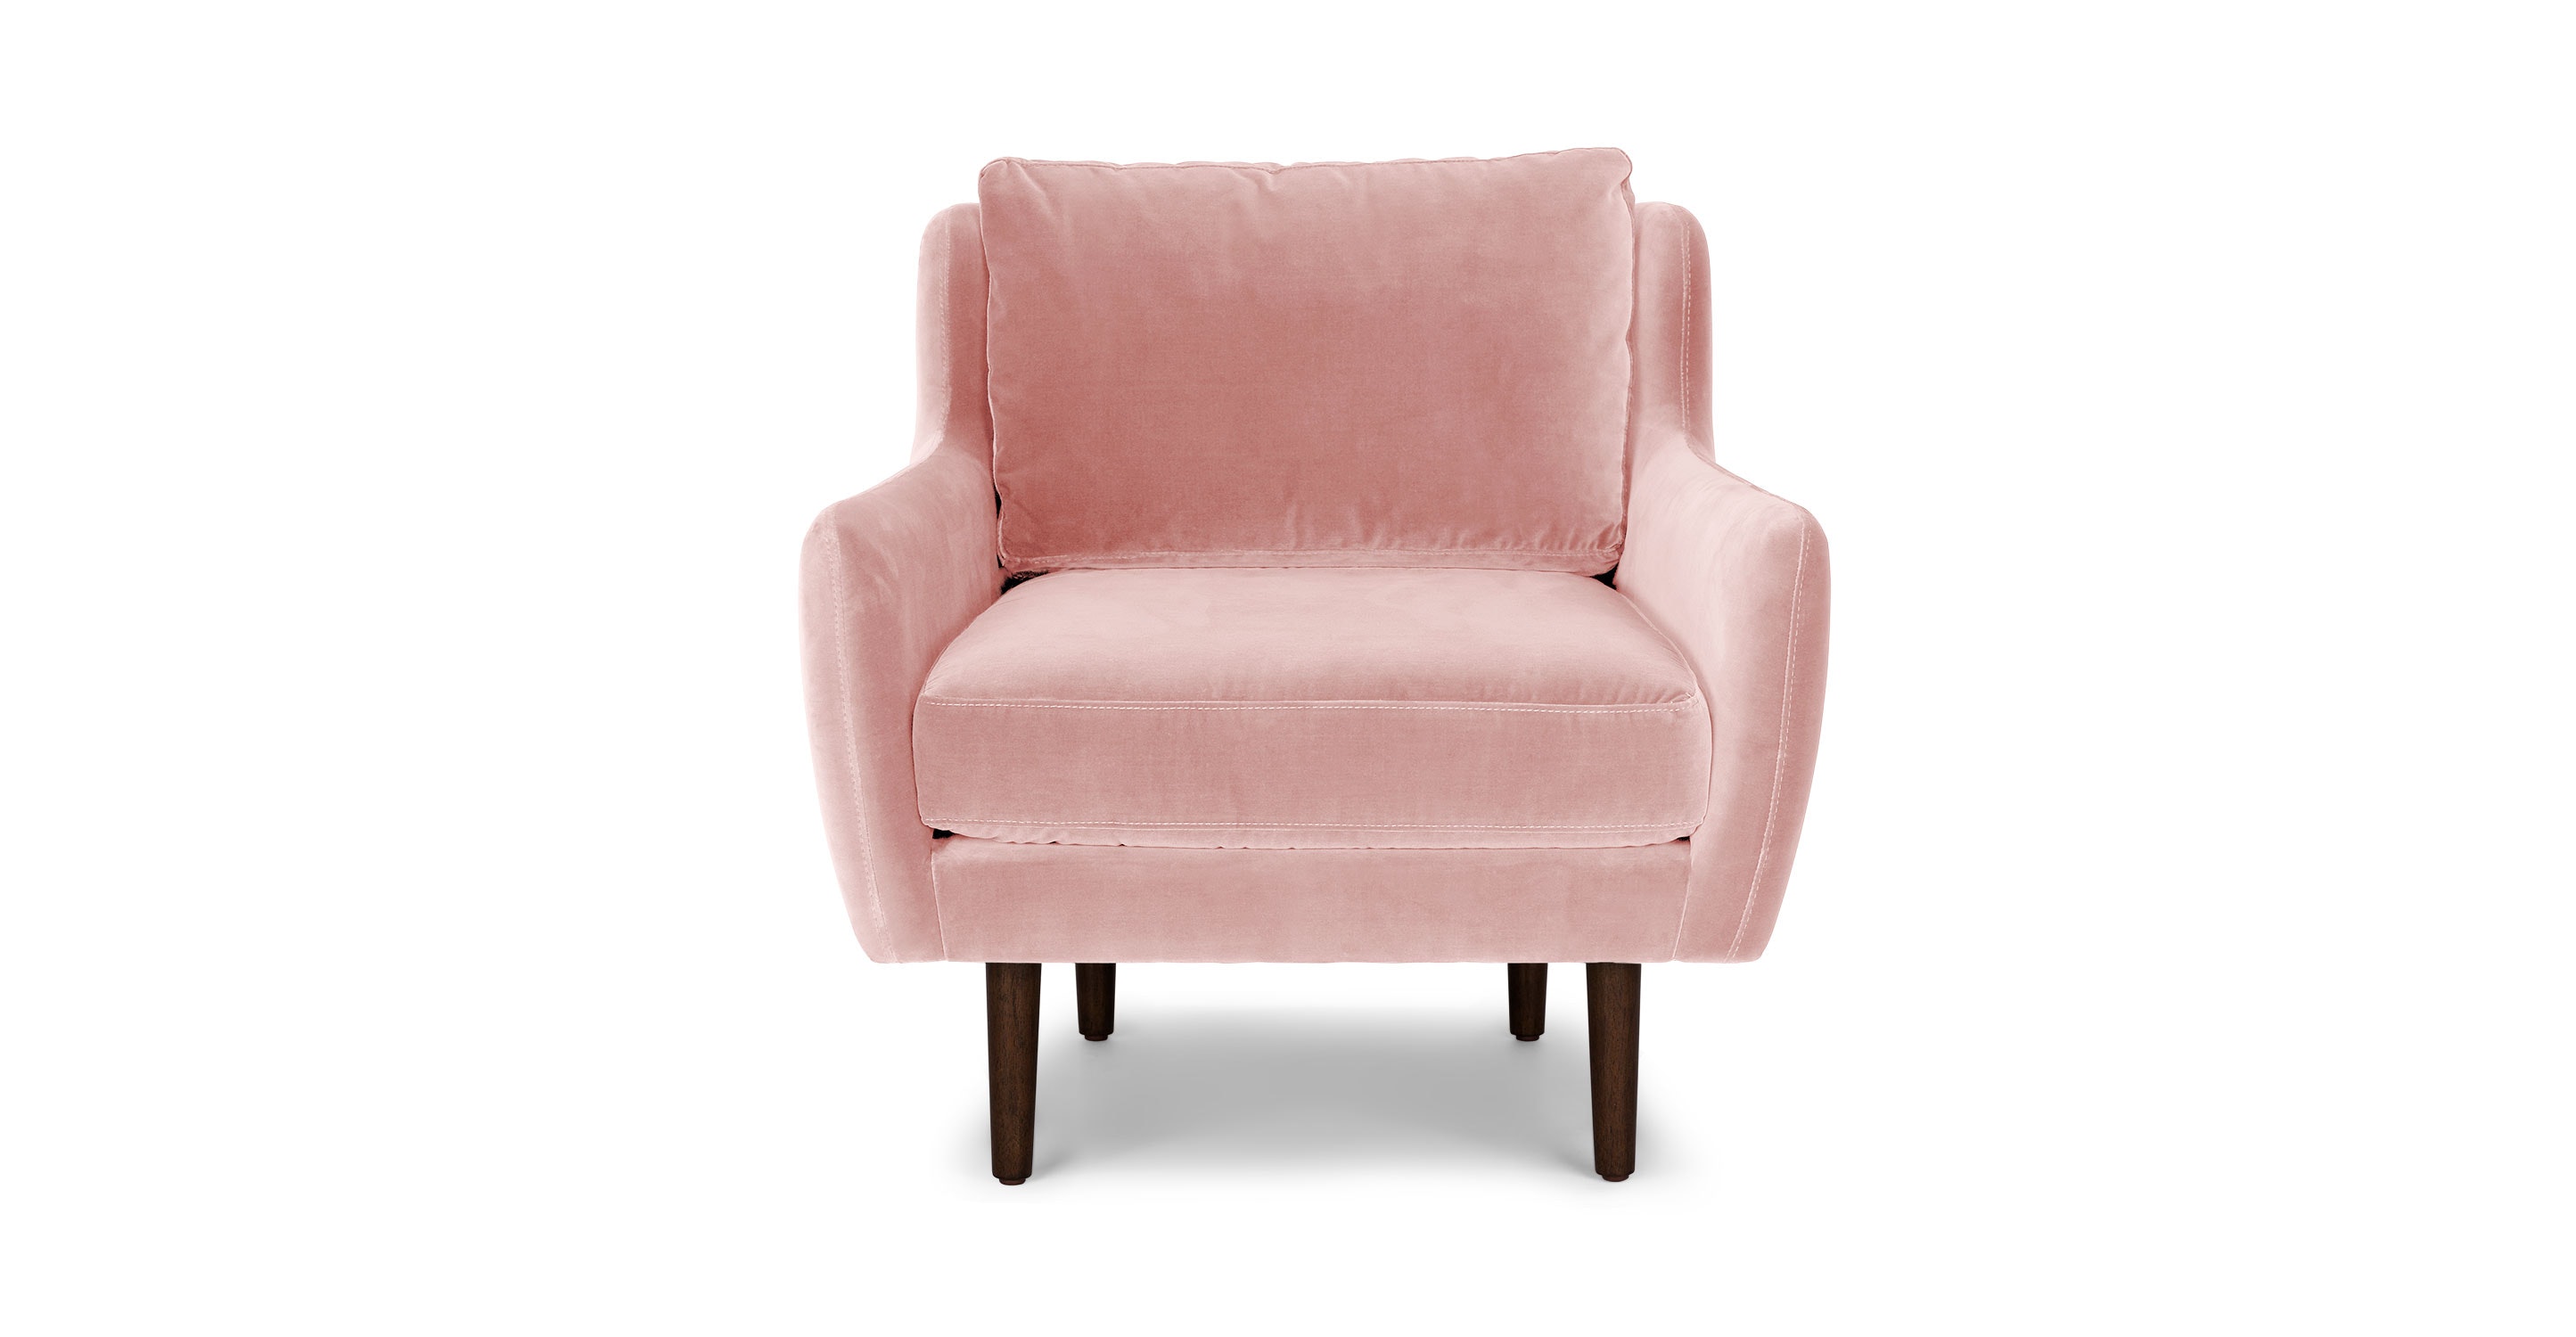 Pink chair photo